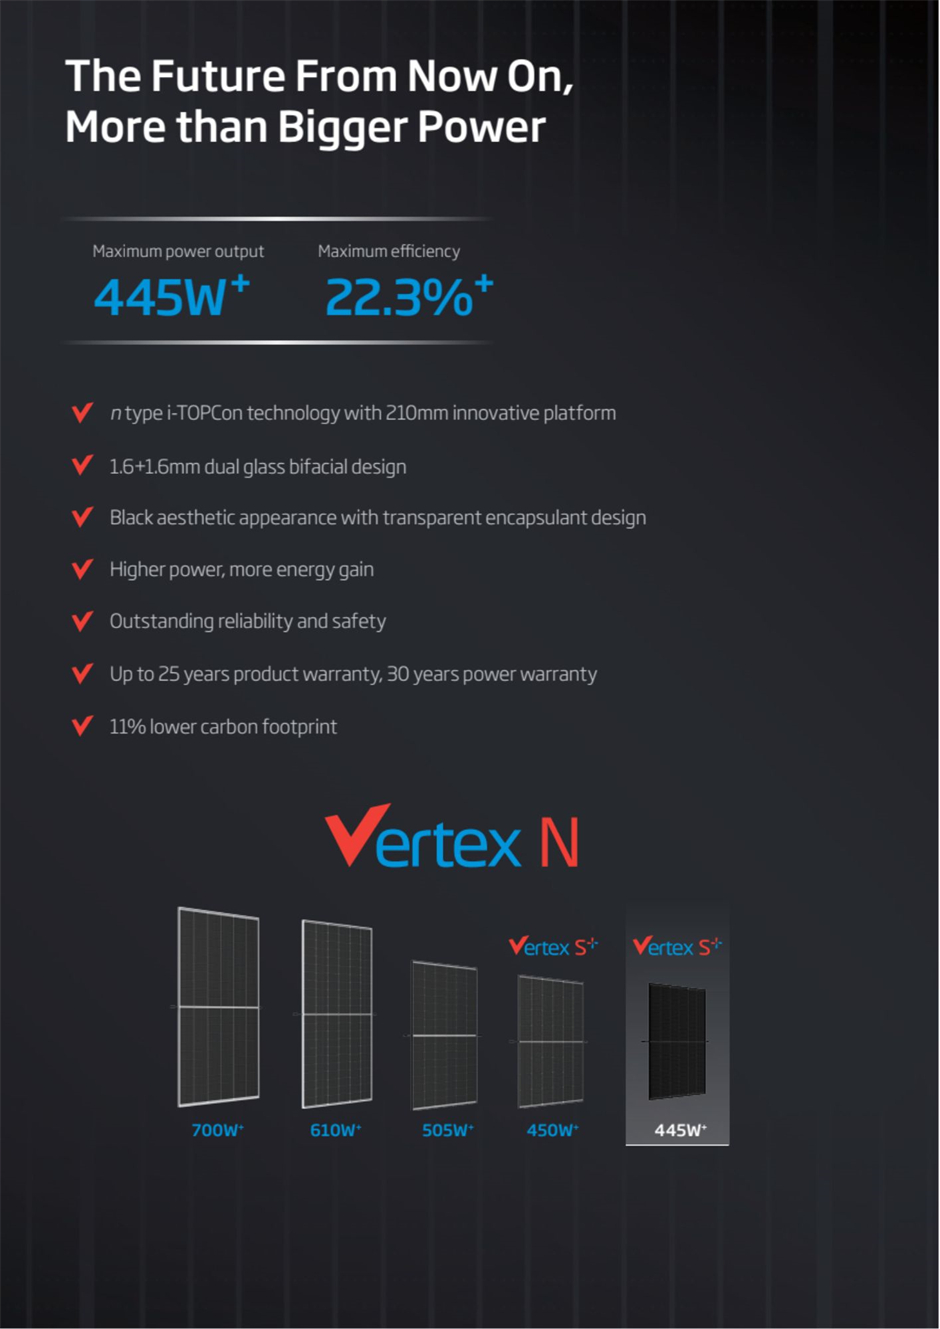 Summary of Vertex S+ Clear Black n-type i-TOPCon dual-glass solar module’s key features, making it a top choice for carports, agrivoltaics, and public spaces seeking a higher visual quality with their solar installations.